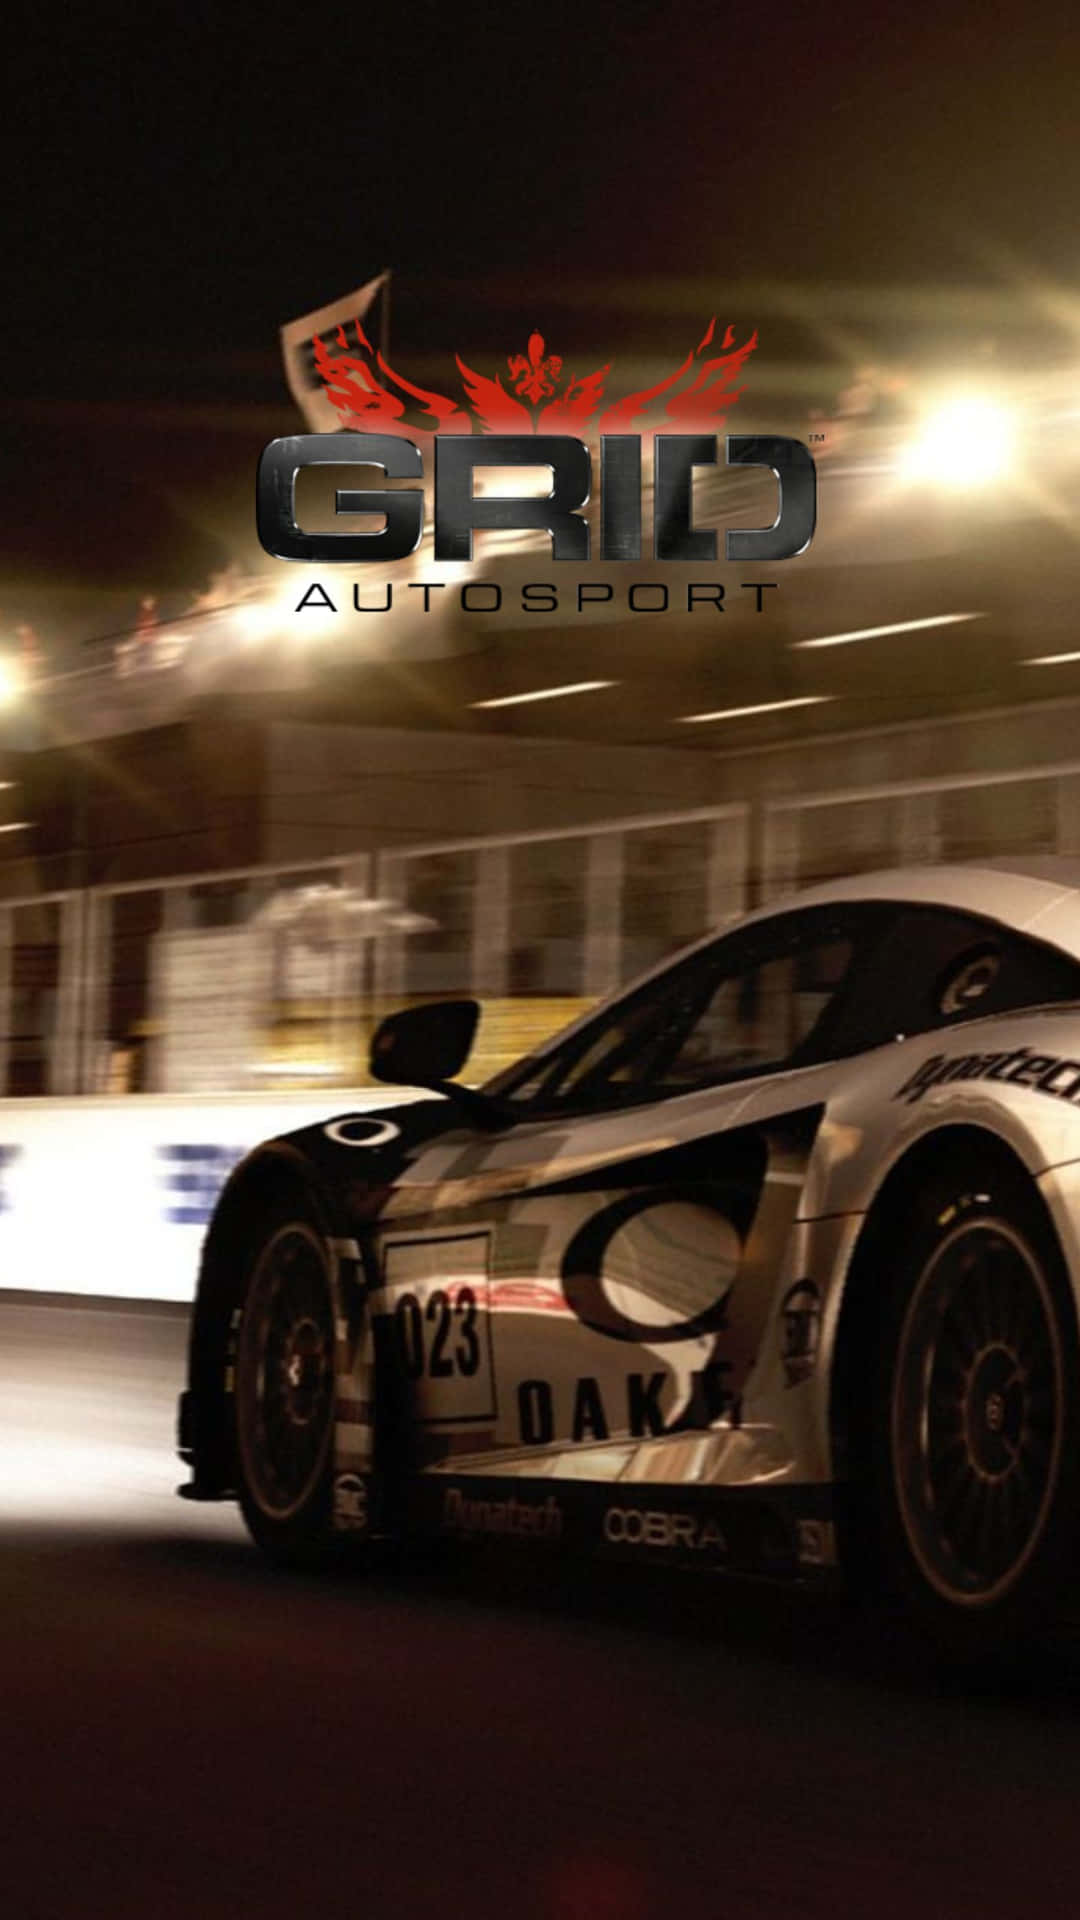 Race into an exhilarating career in Android Grid Autosport